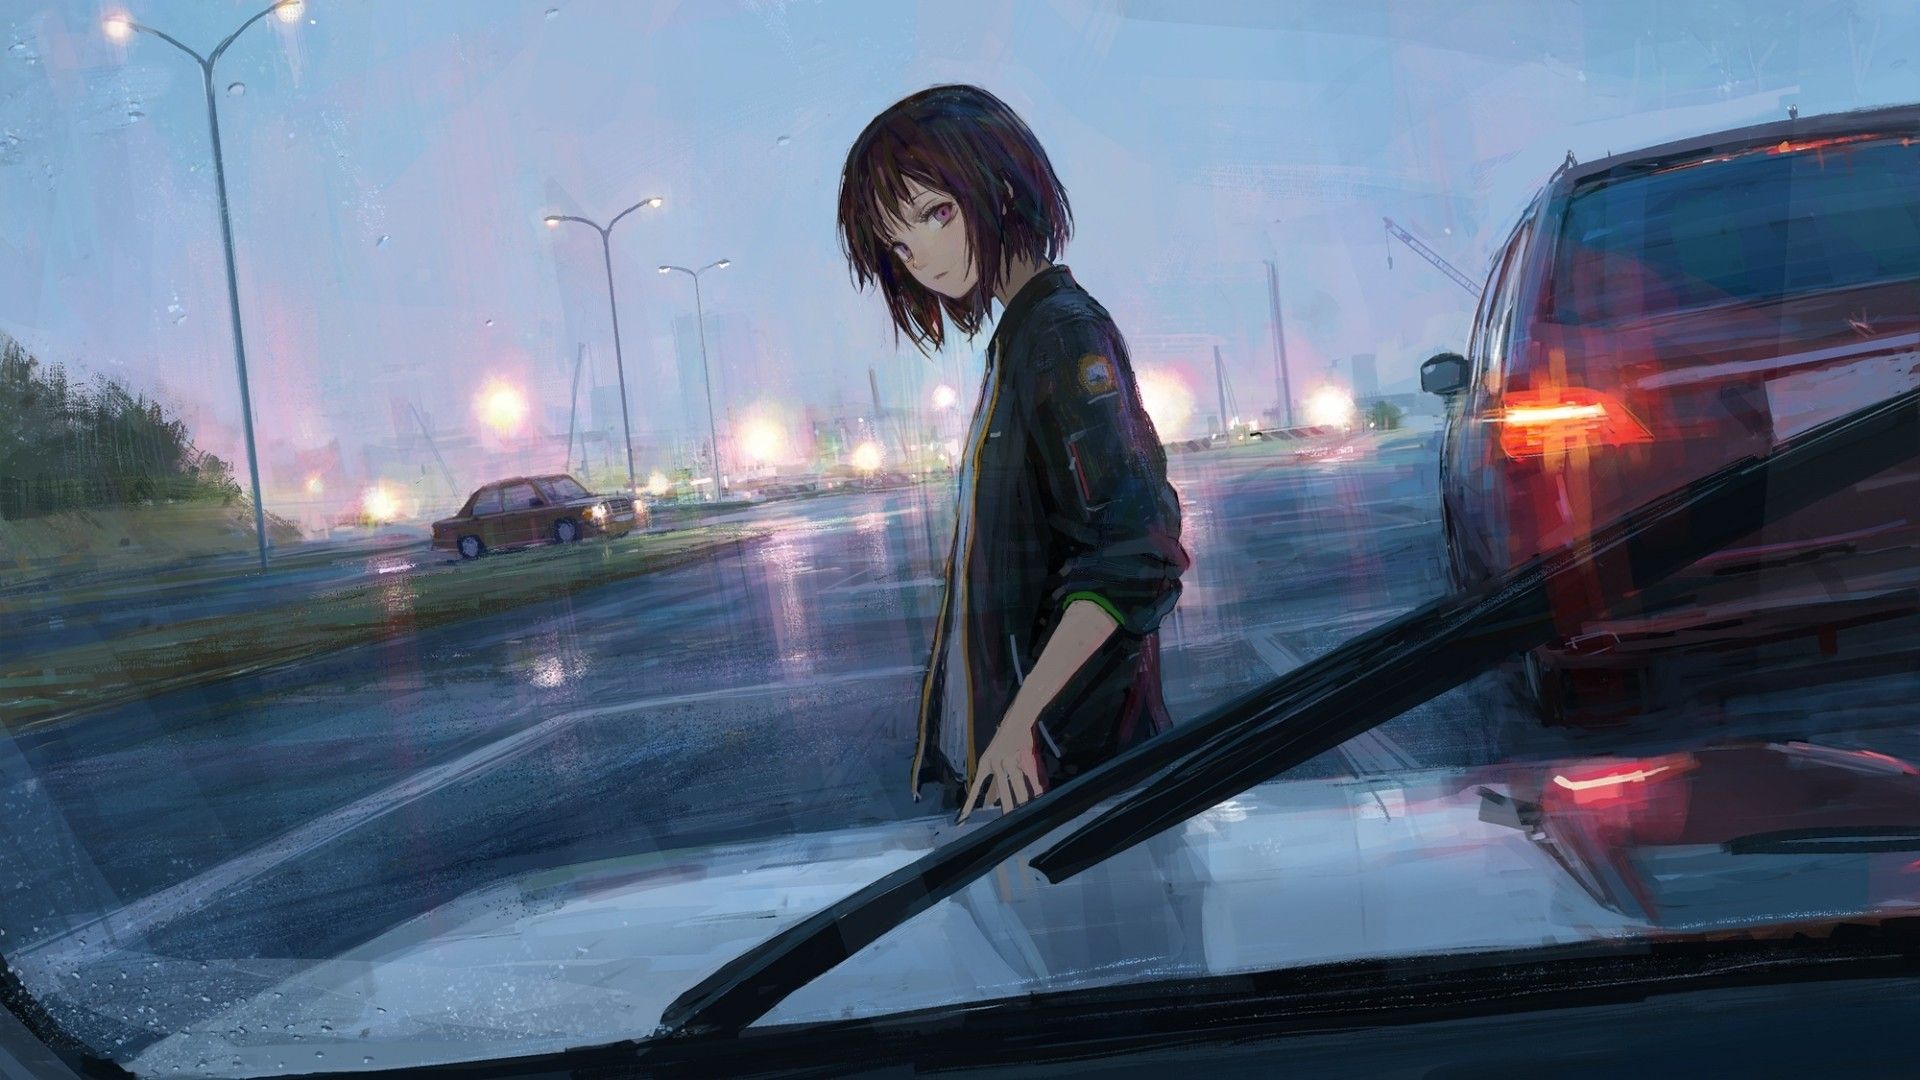 Download 1920x1080 Anime Girl, Cars, Painting, Road, Lights, Short Hair Wallpaper for Widescreen